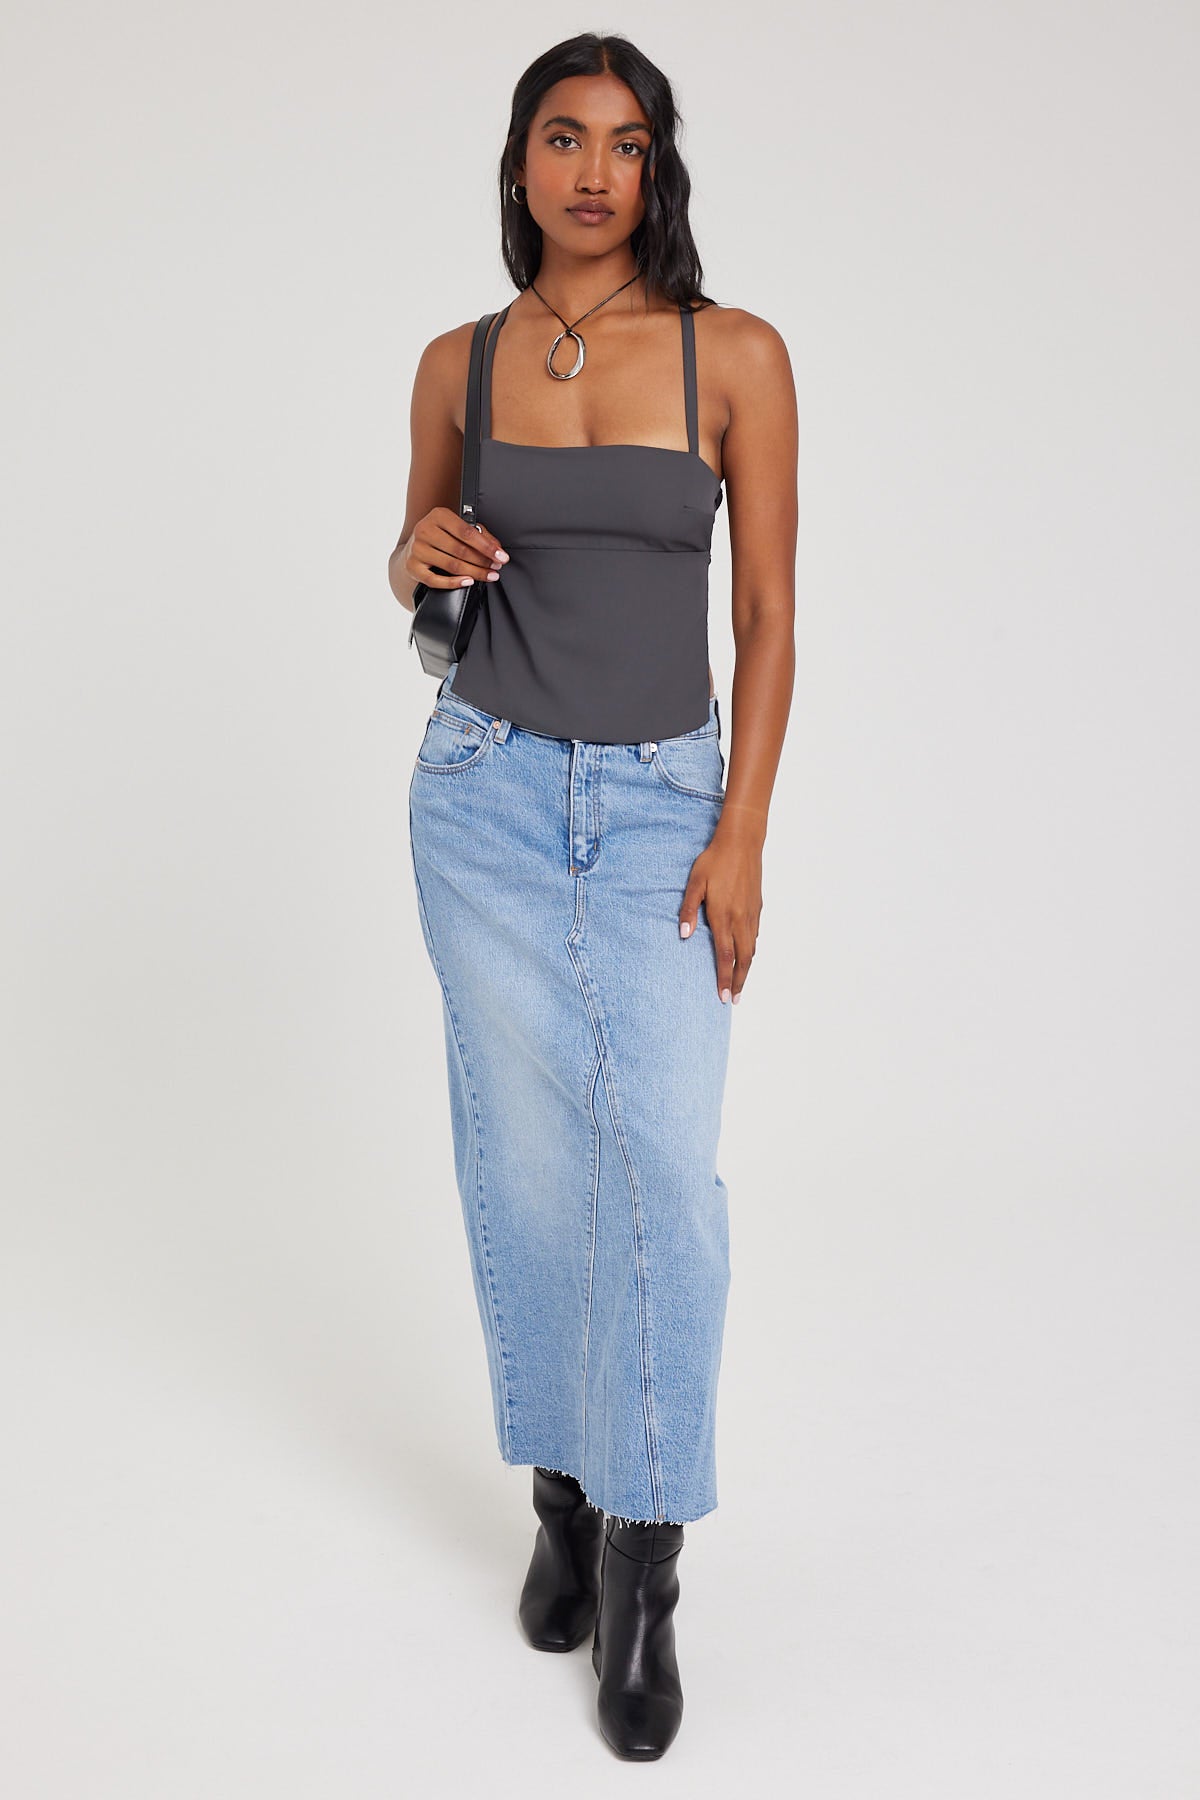 Perfect Stranger Lace Up Back Tie Top Charcoal